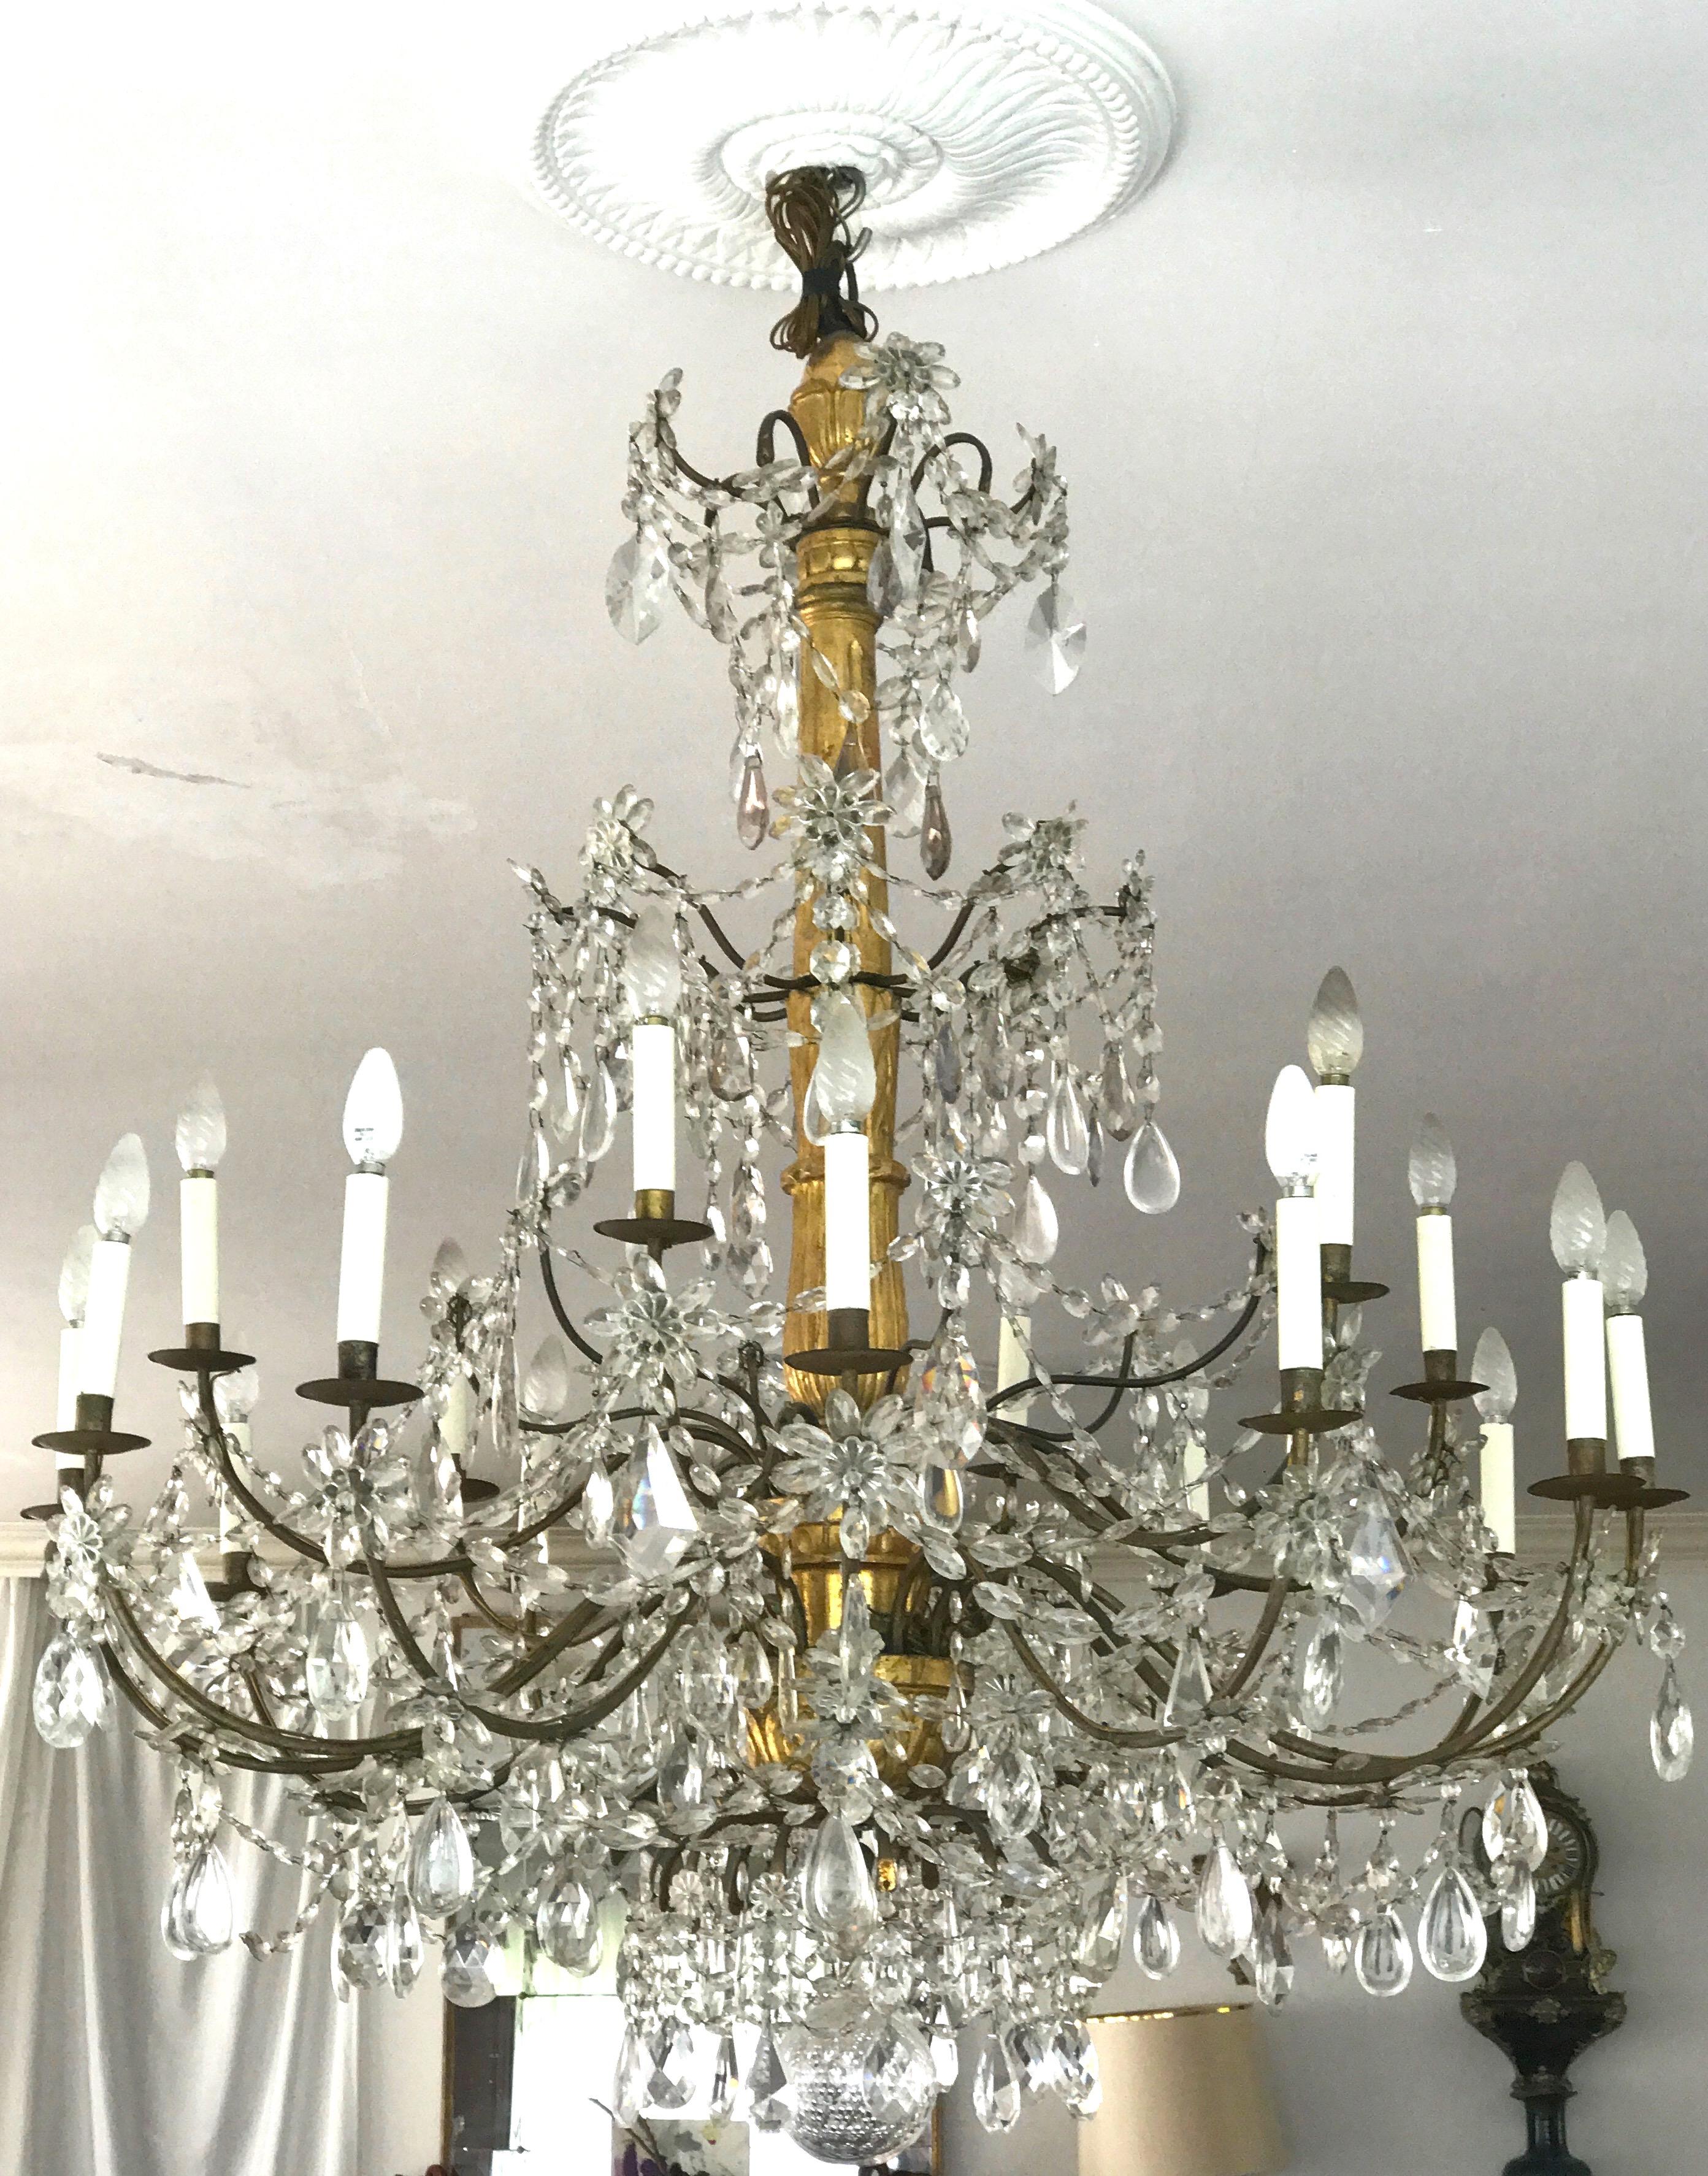 Italian Giltwood and Crystal Chandelier 18th Century Great Beauty 6